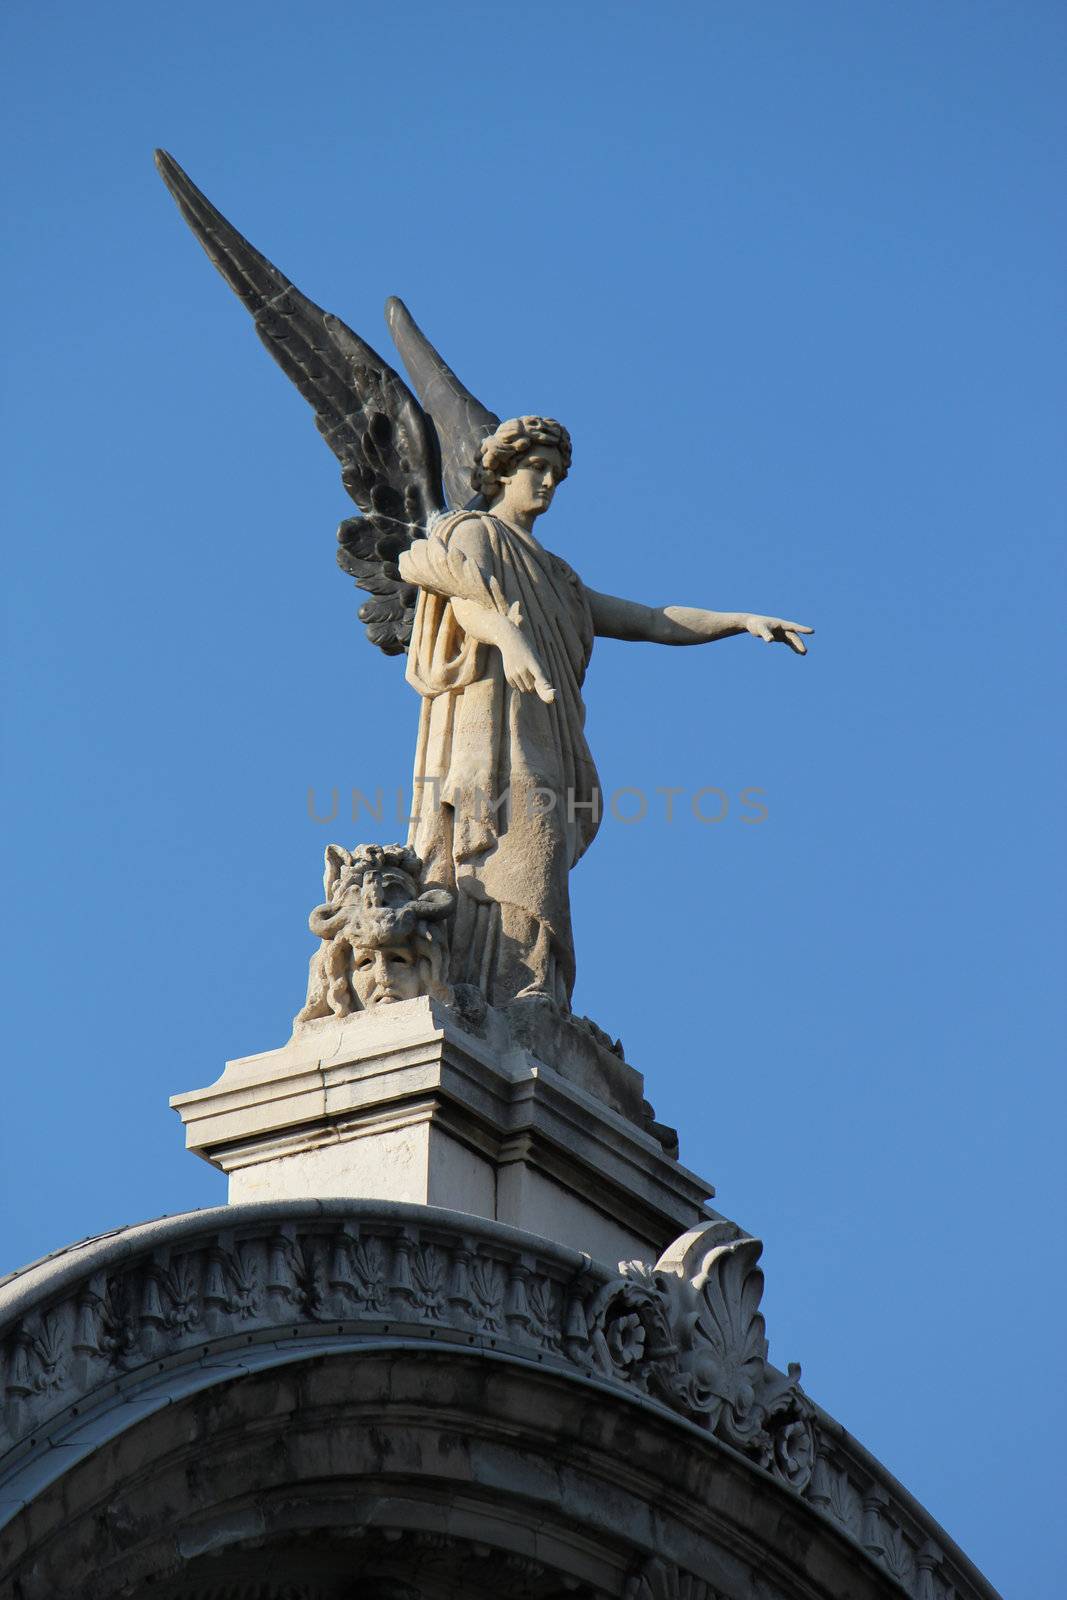 Statue of and angel on the top of a monument